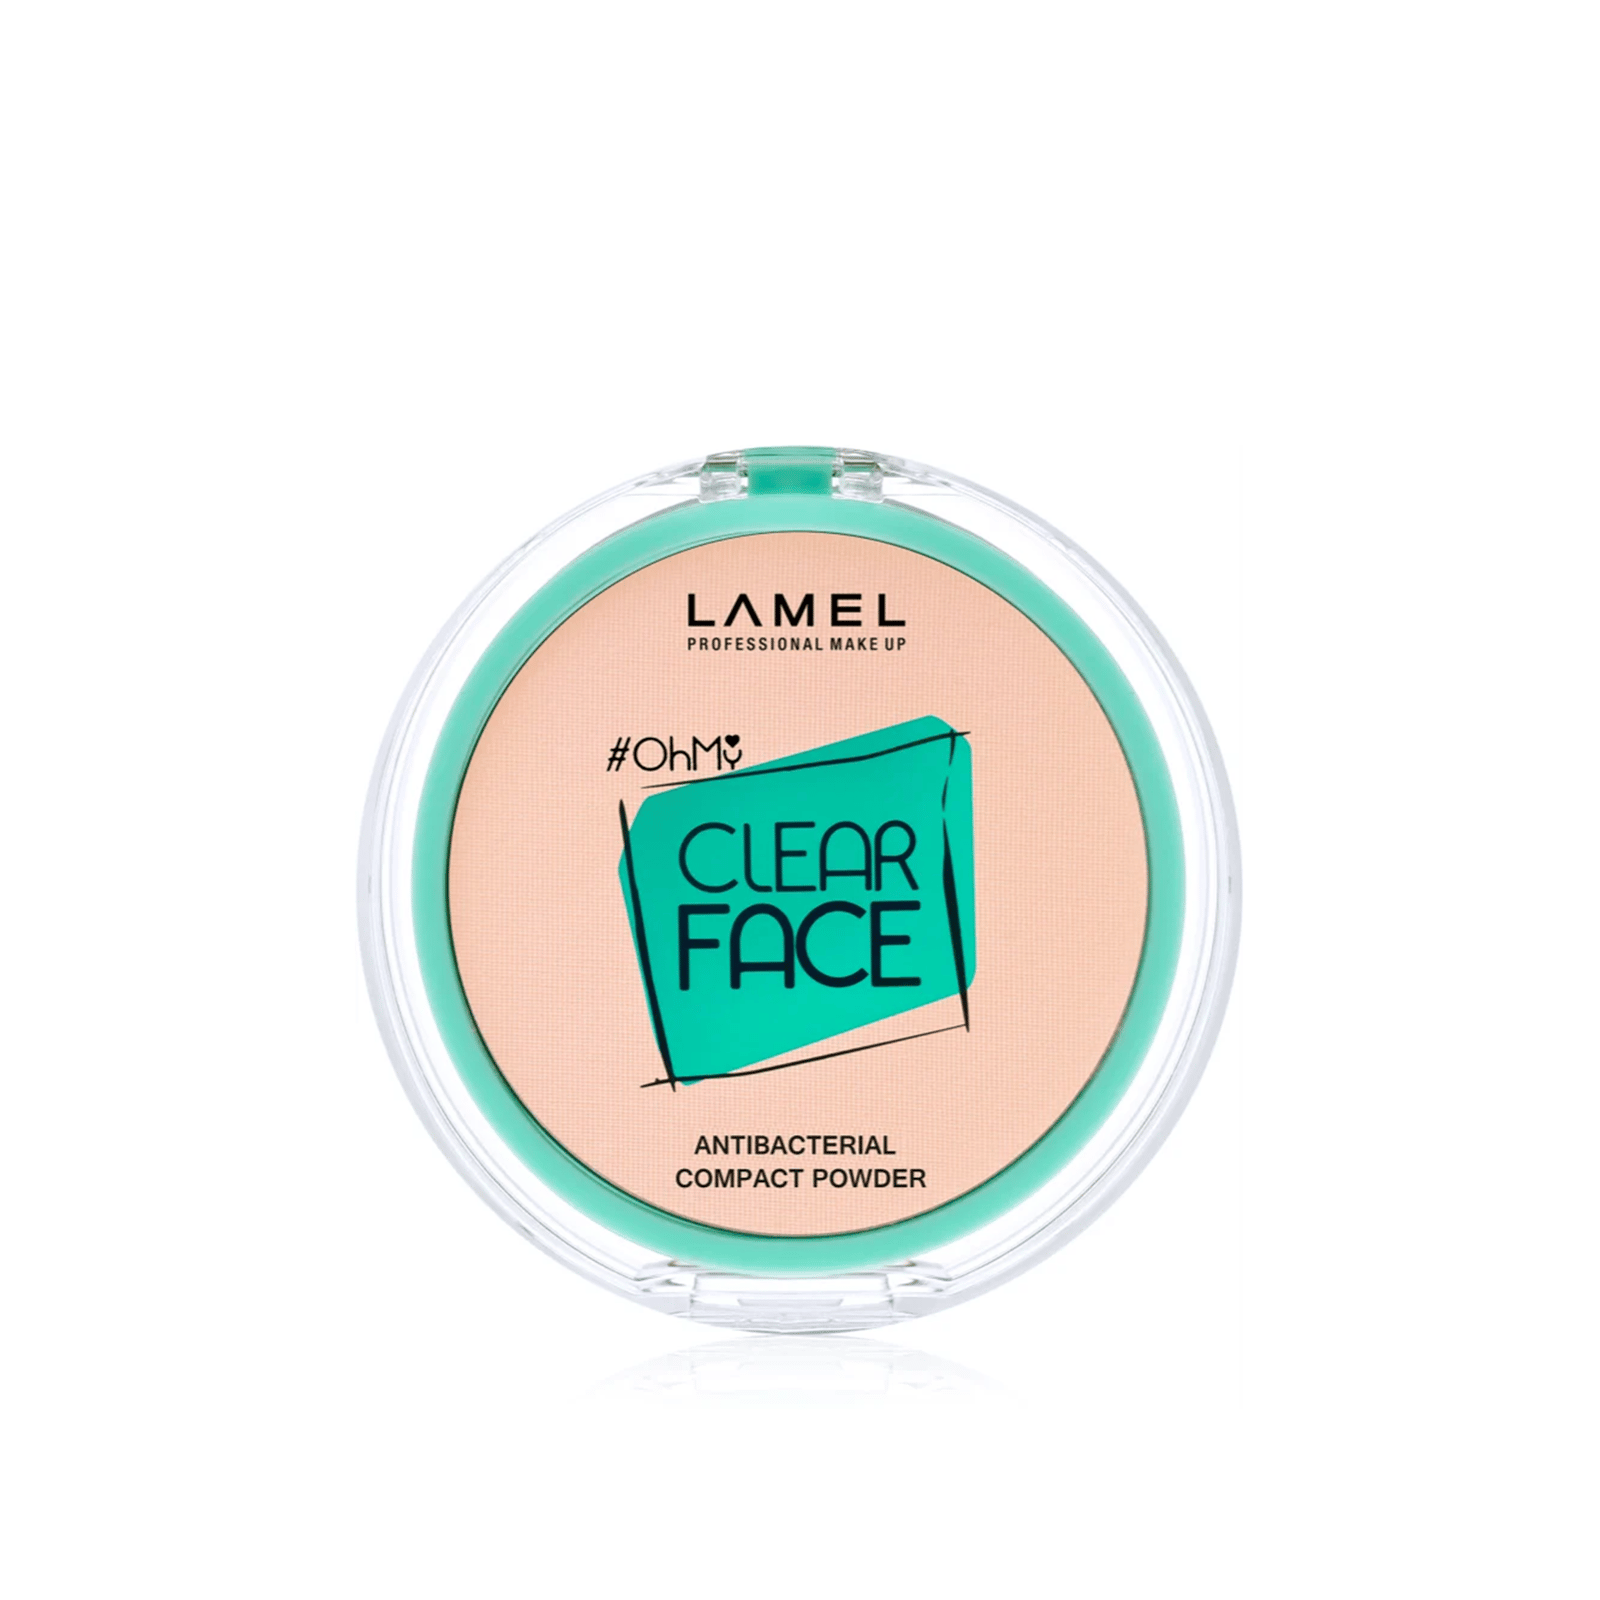 Lamel Oh My Clear Face Compact Powder 405 Sand Beige 6g (0.21oz)